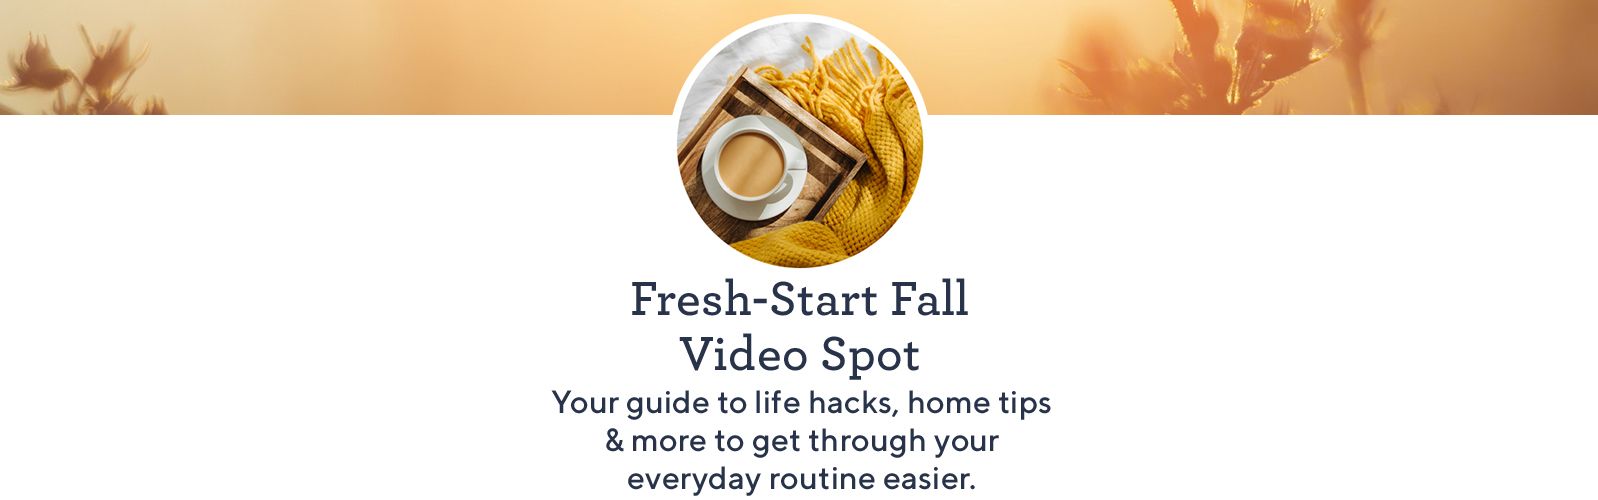 Fresh-Start Fall Video Spot Your guide to life hacks, home tips & more to get through your everyday routine easier.